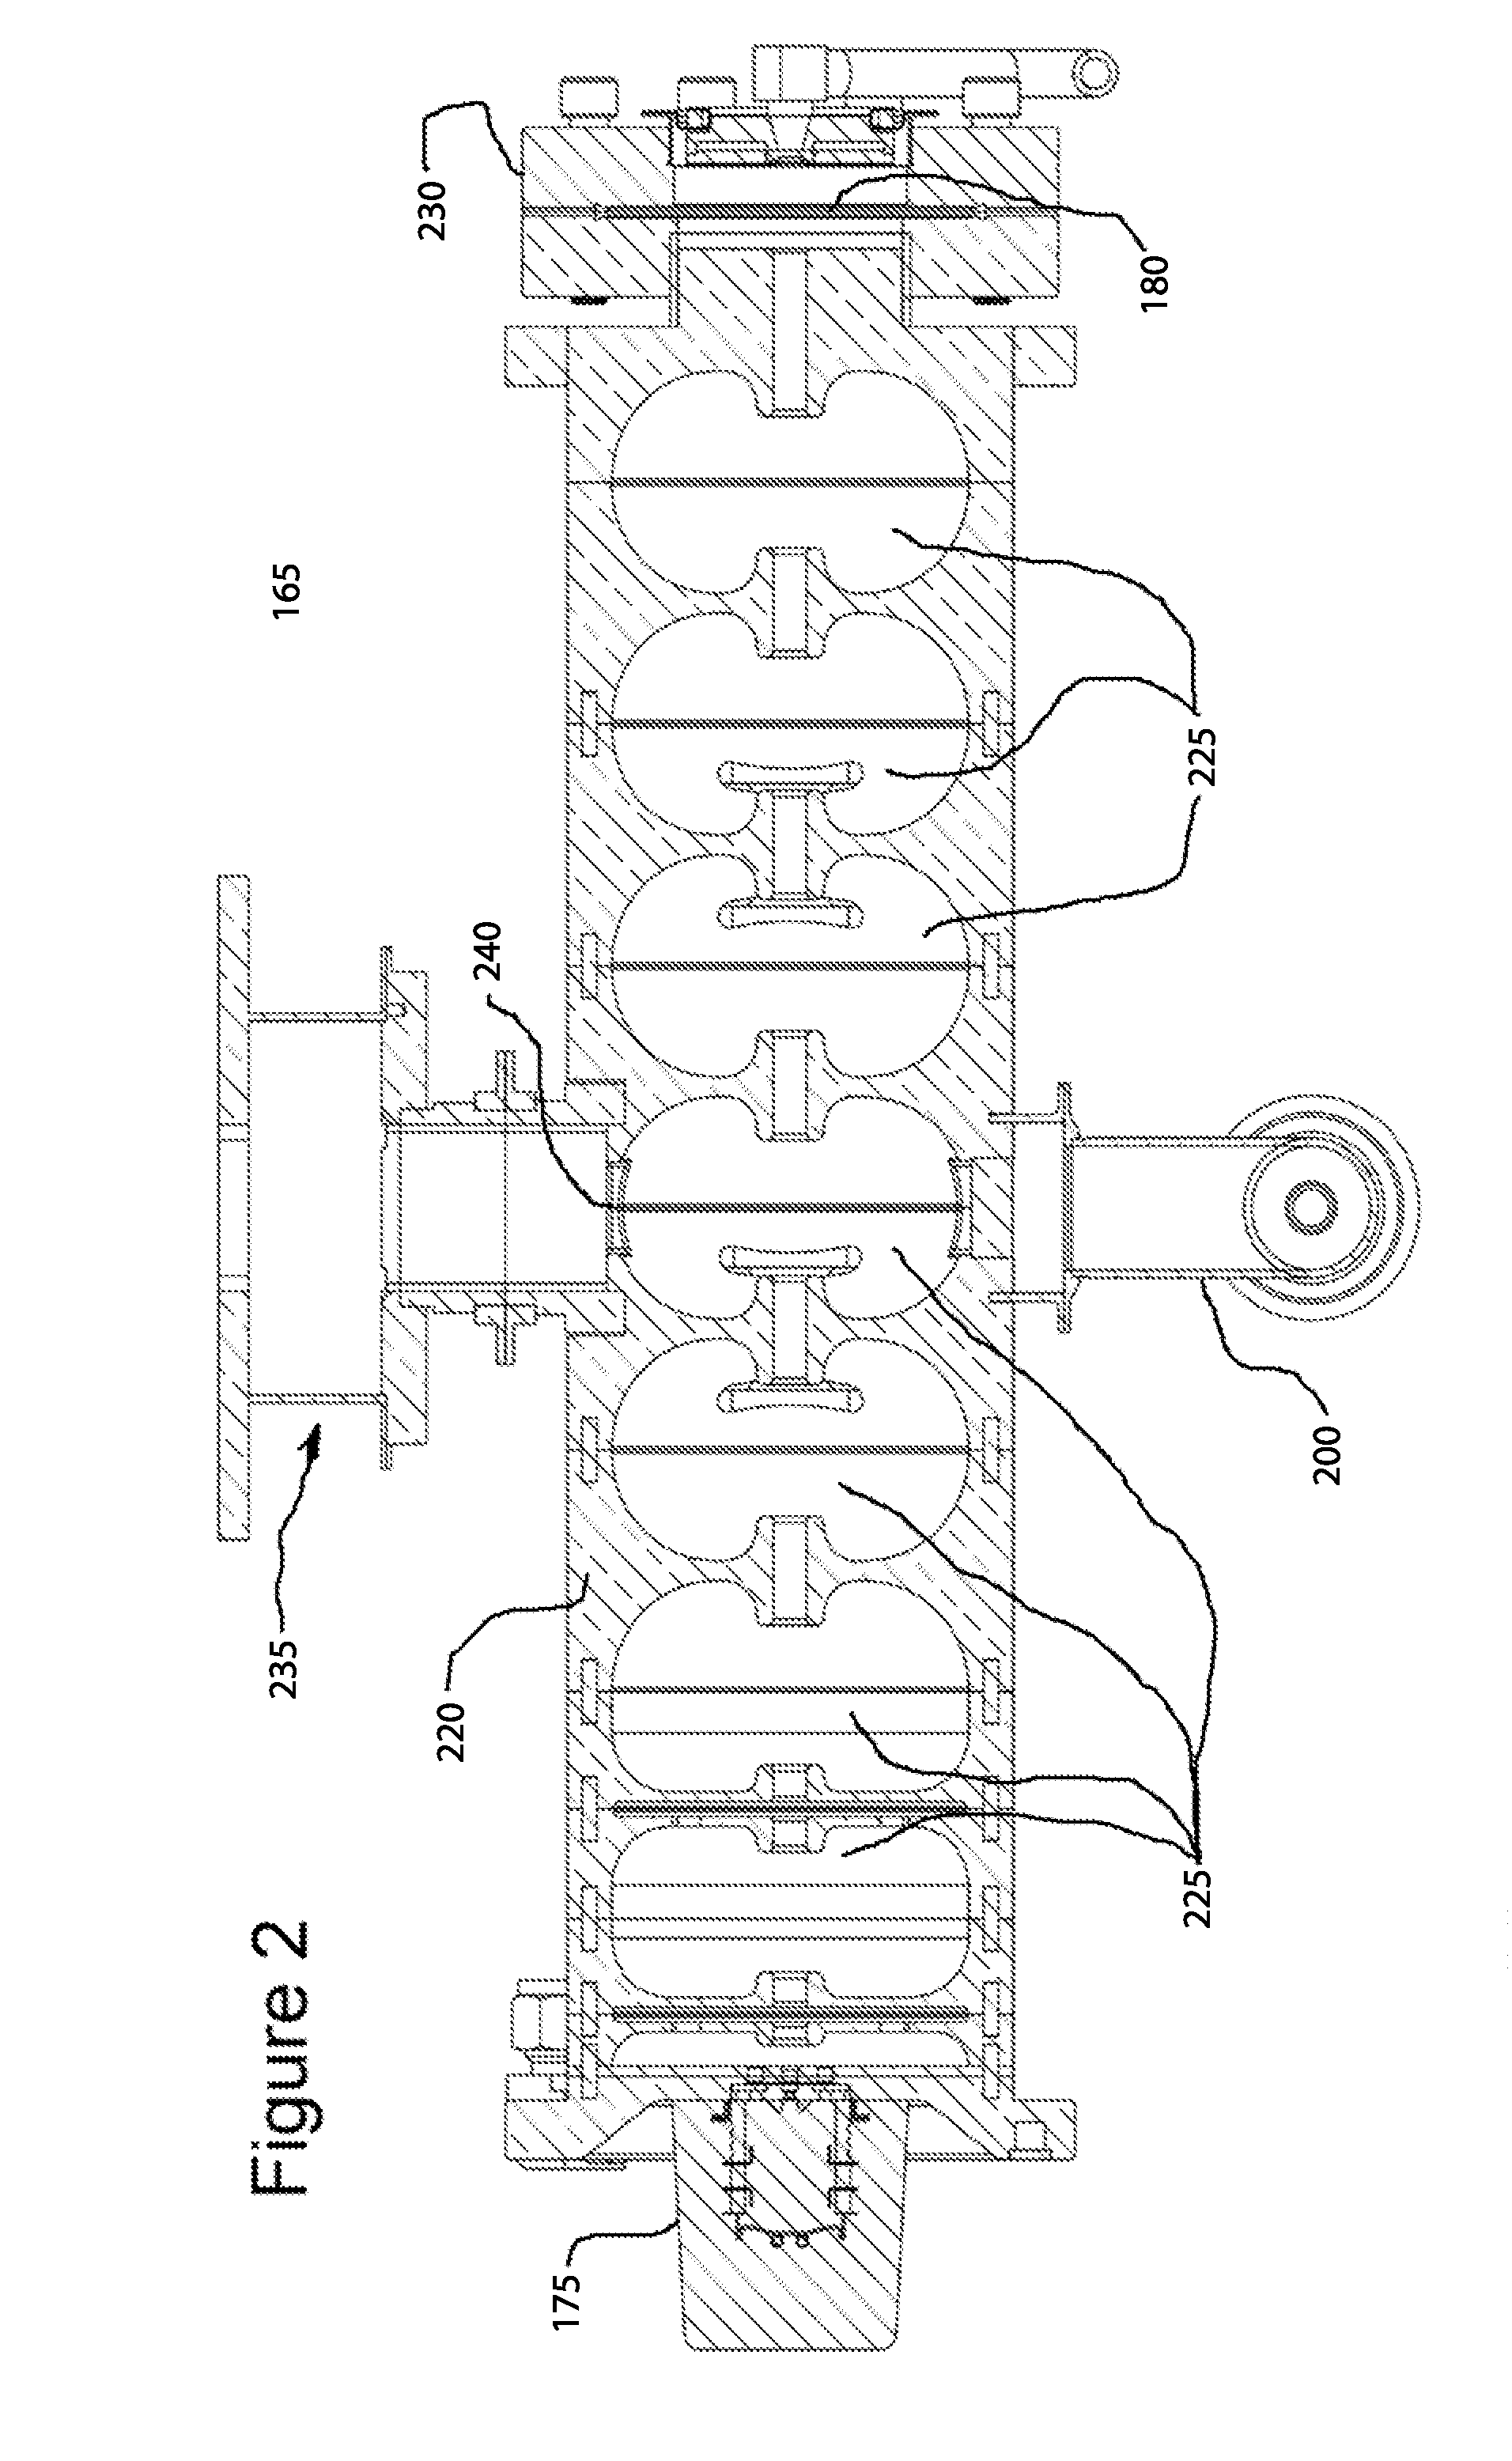 Linear accelerator system with stable interleaved and intermittent pulsing